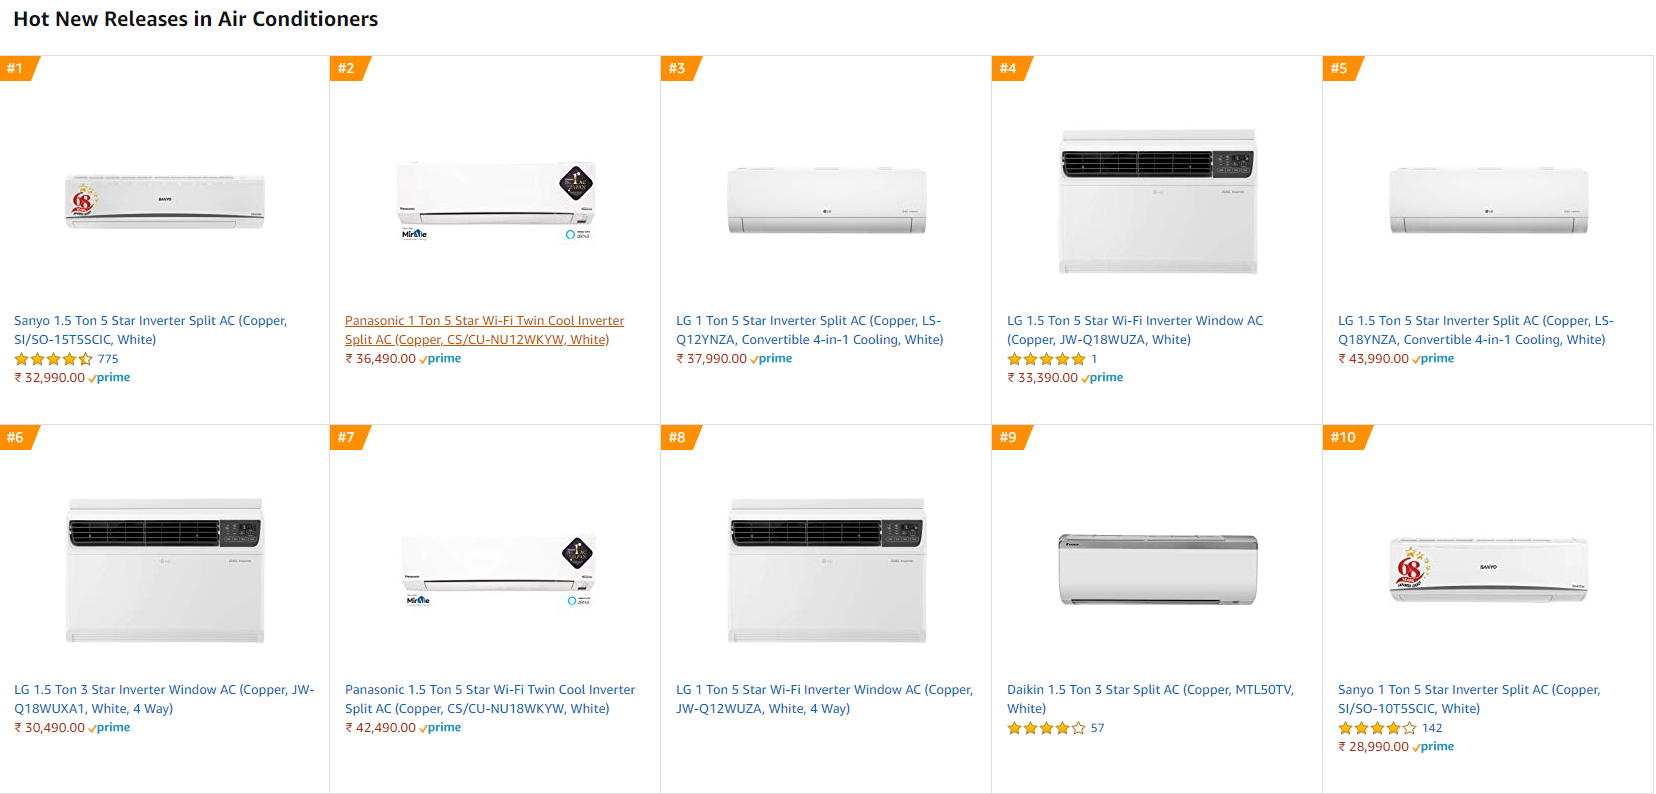 Hot New Releases in Air Conditioners